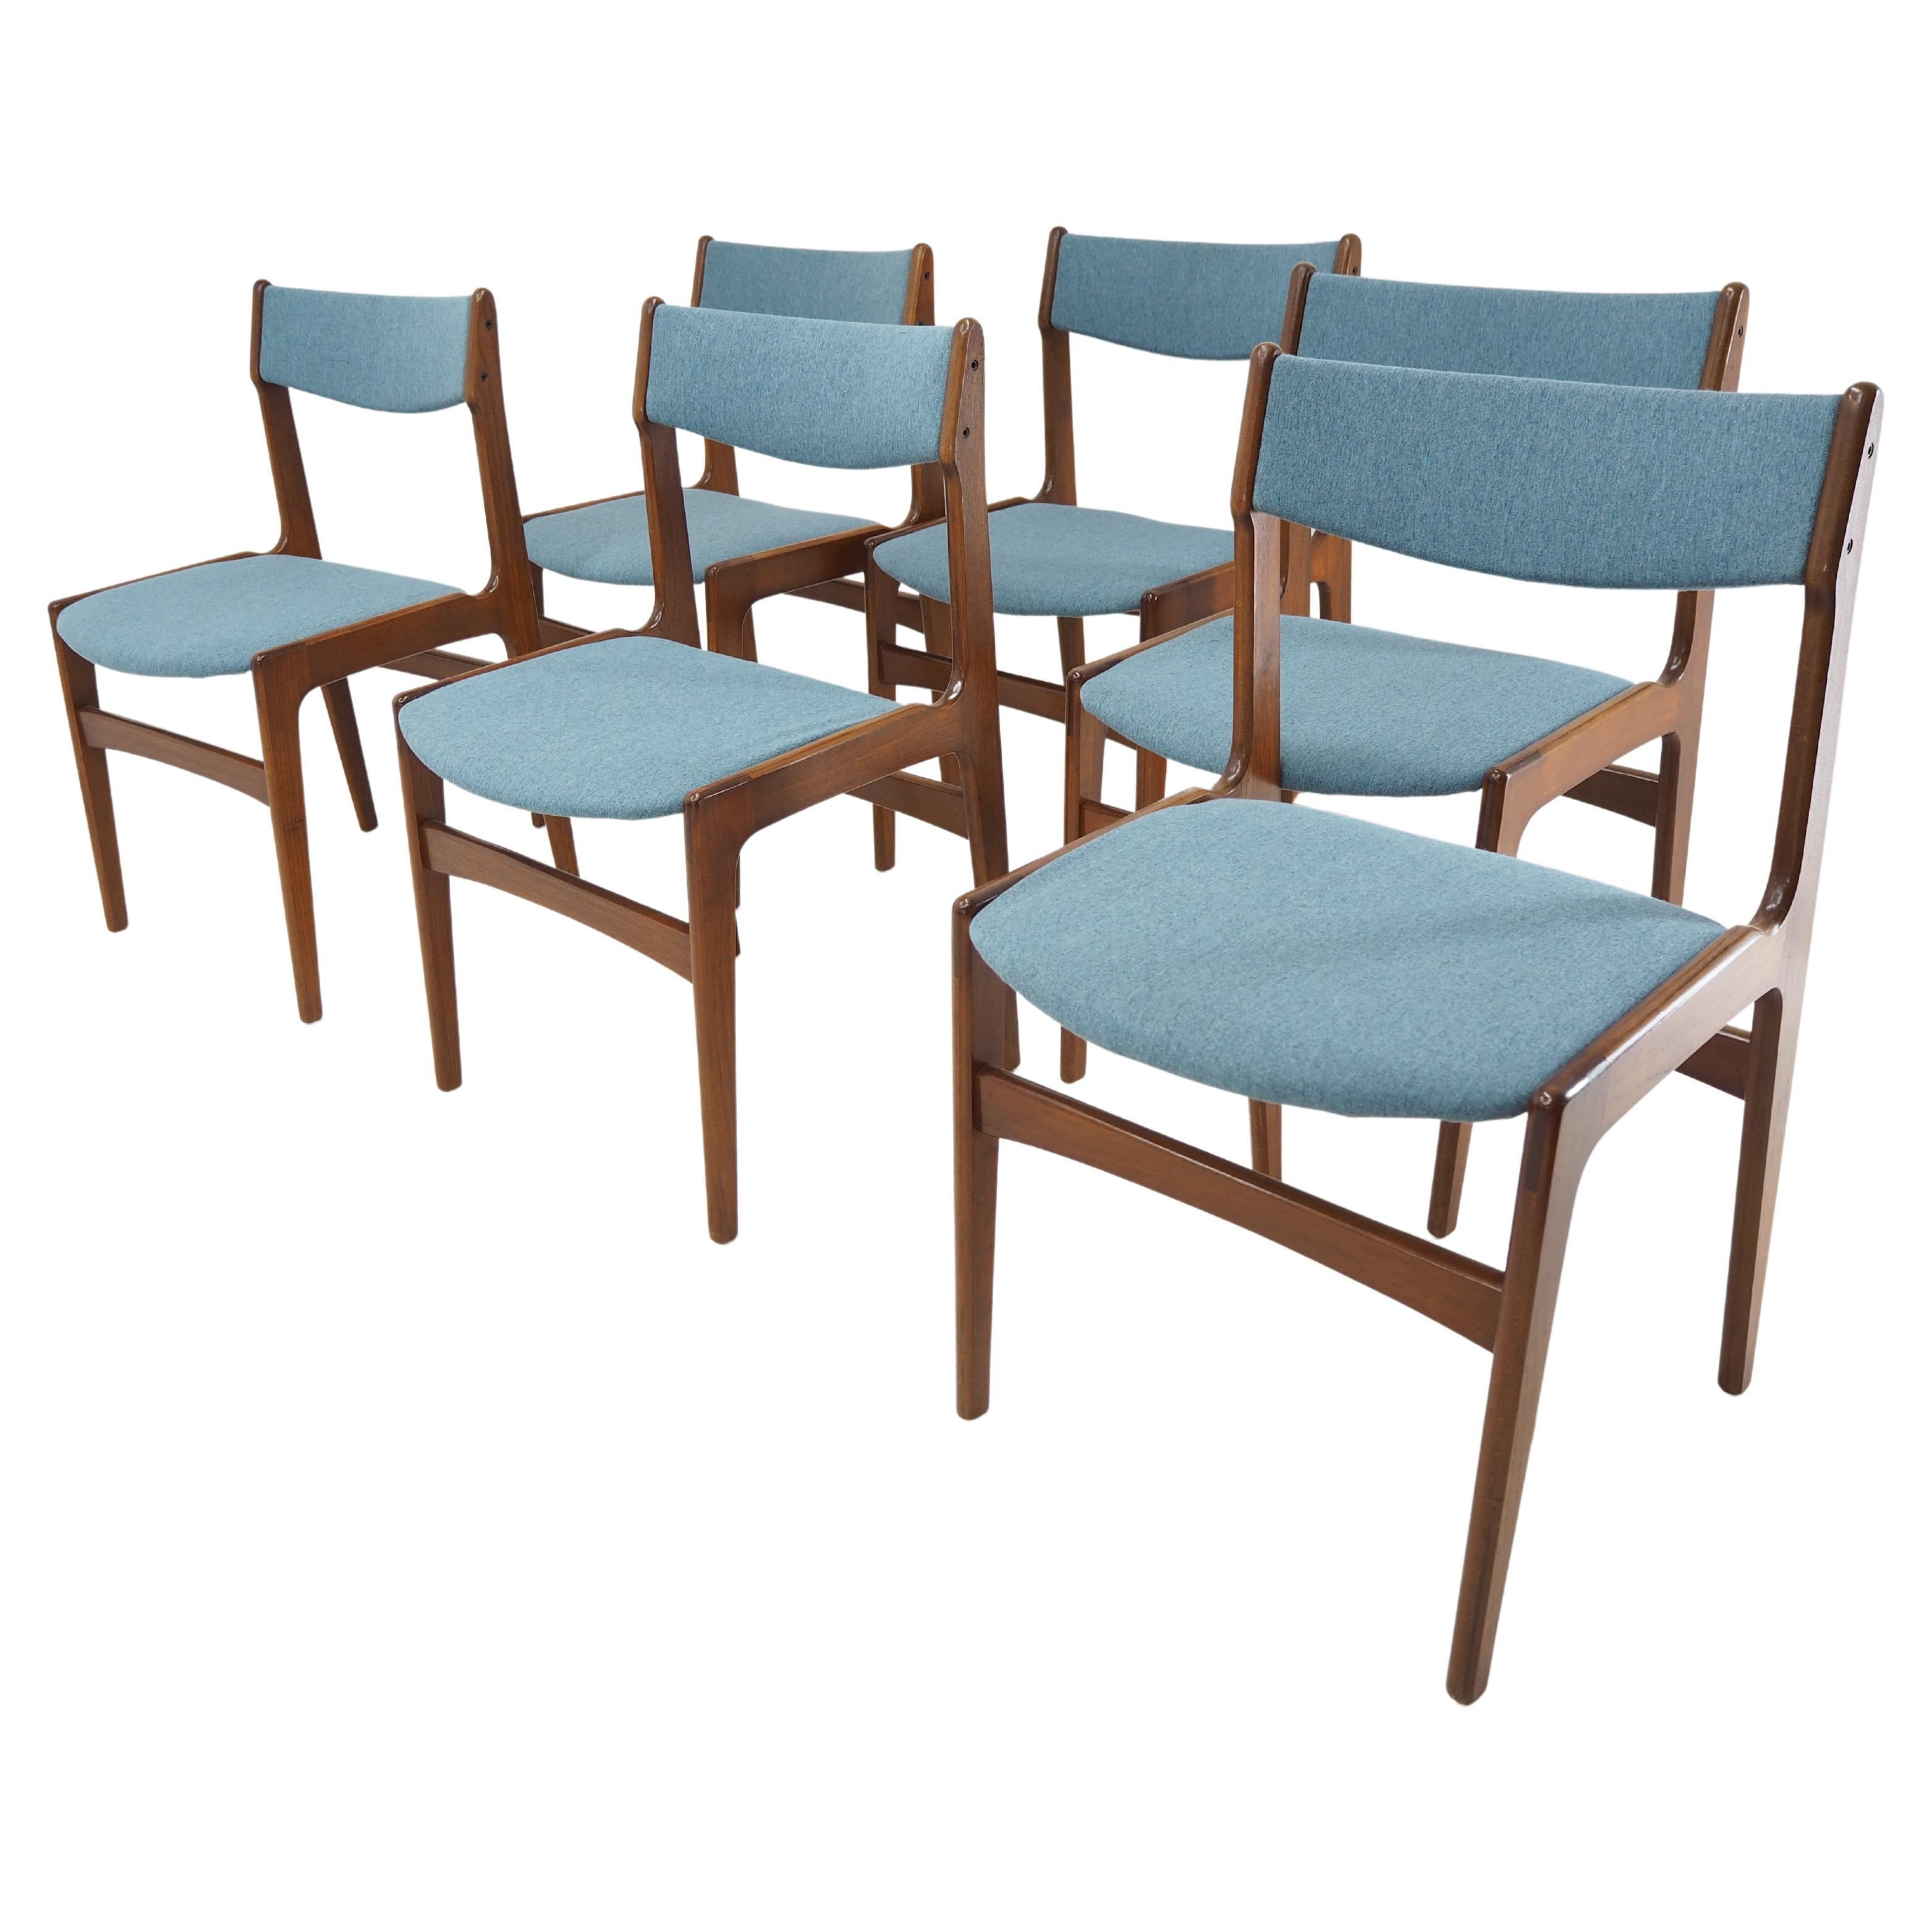 1960s Set of Six Dining Chairs, Denmark